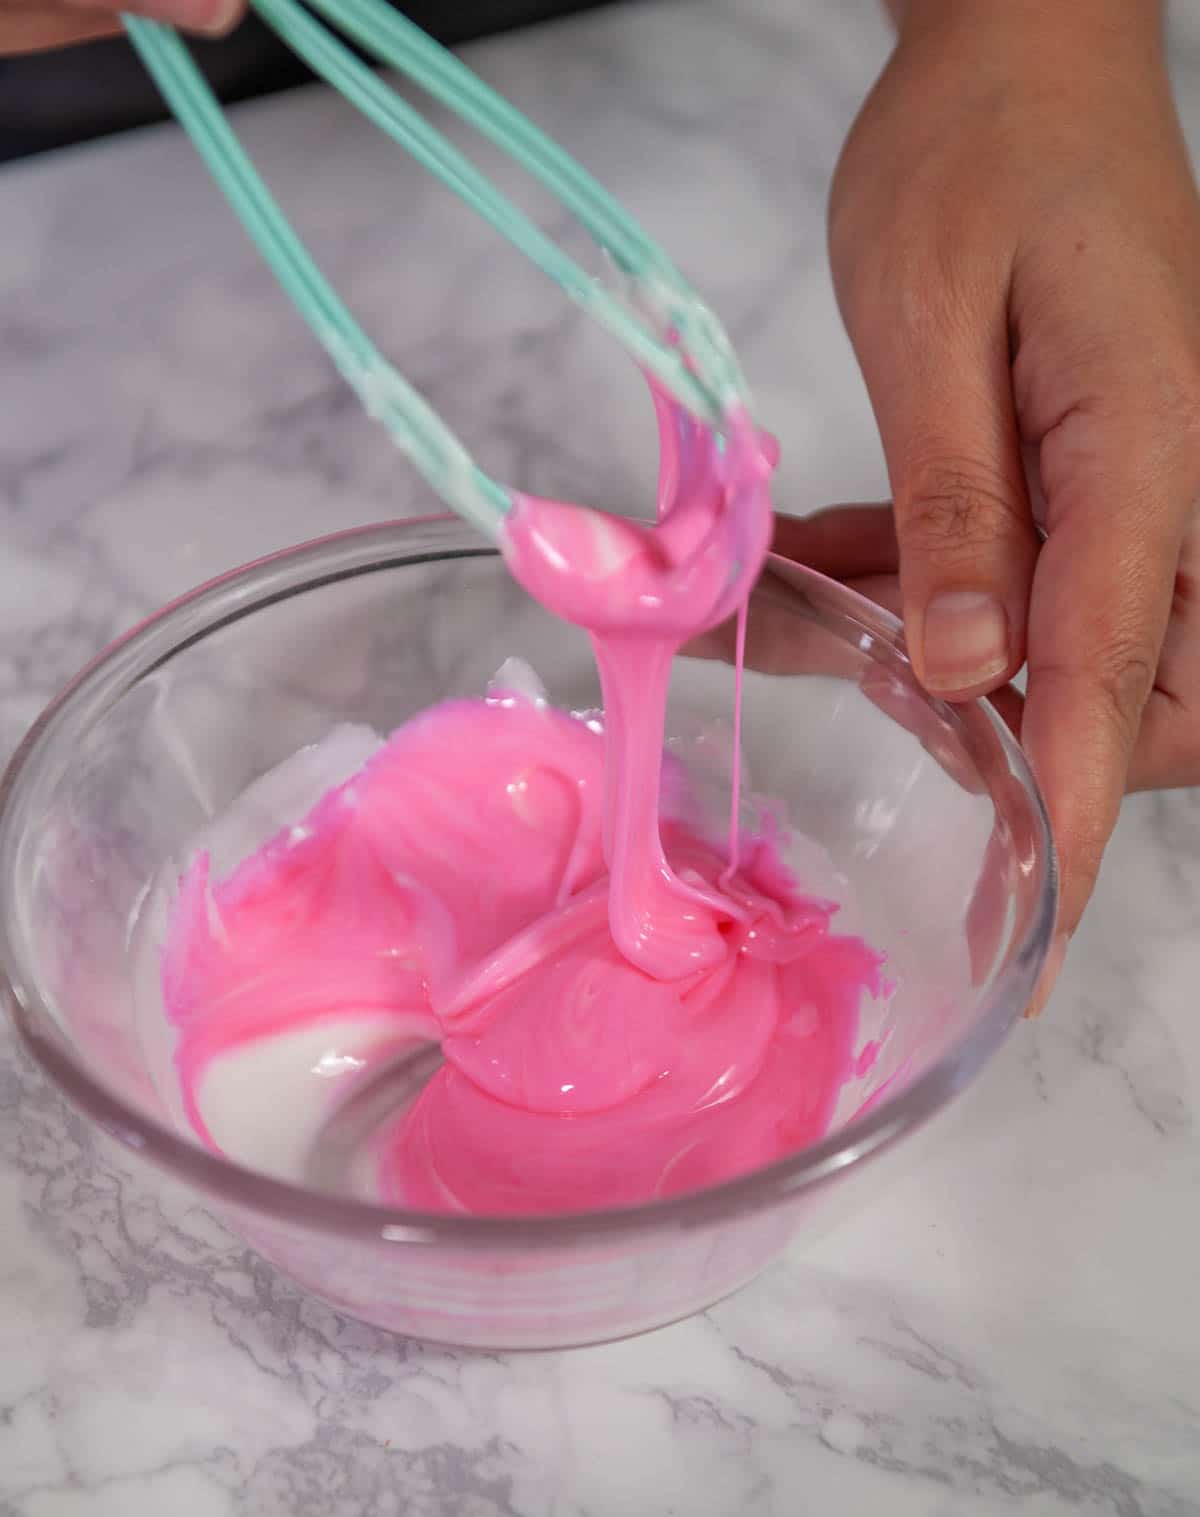 coloring donut glaze with pink and blue food coloring